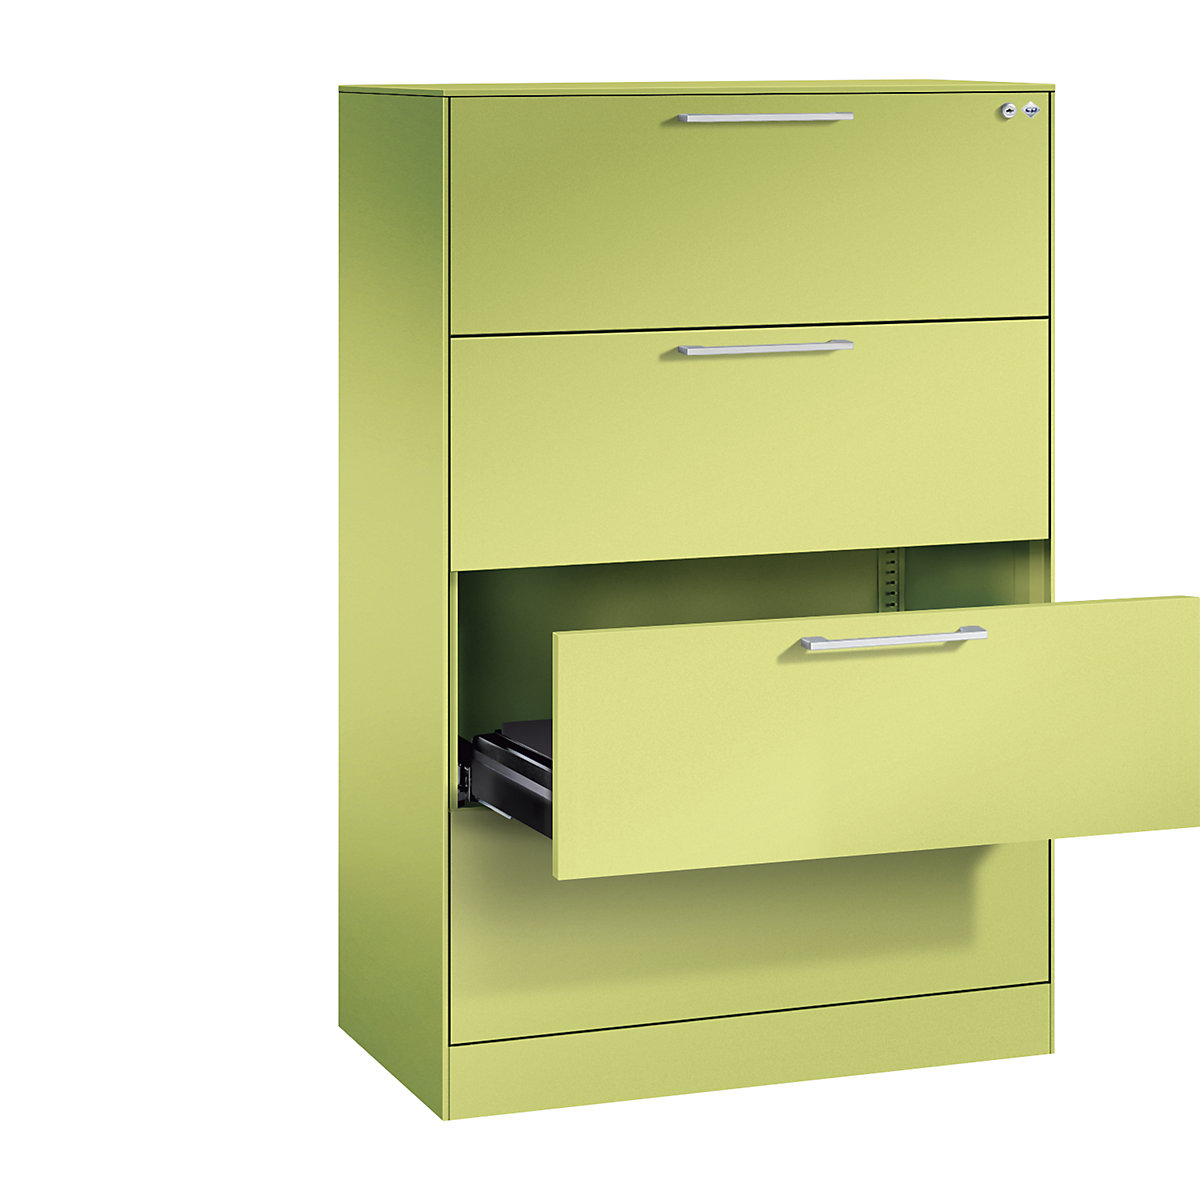 ASISTO card file cabinet – C+P, height 1292 mm, with 4 drawers, A4 landscape, viridian green/viridian green-19